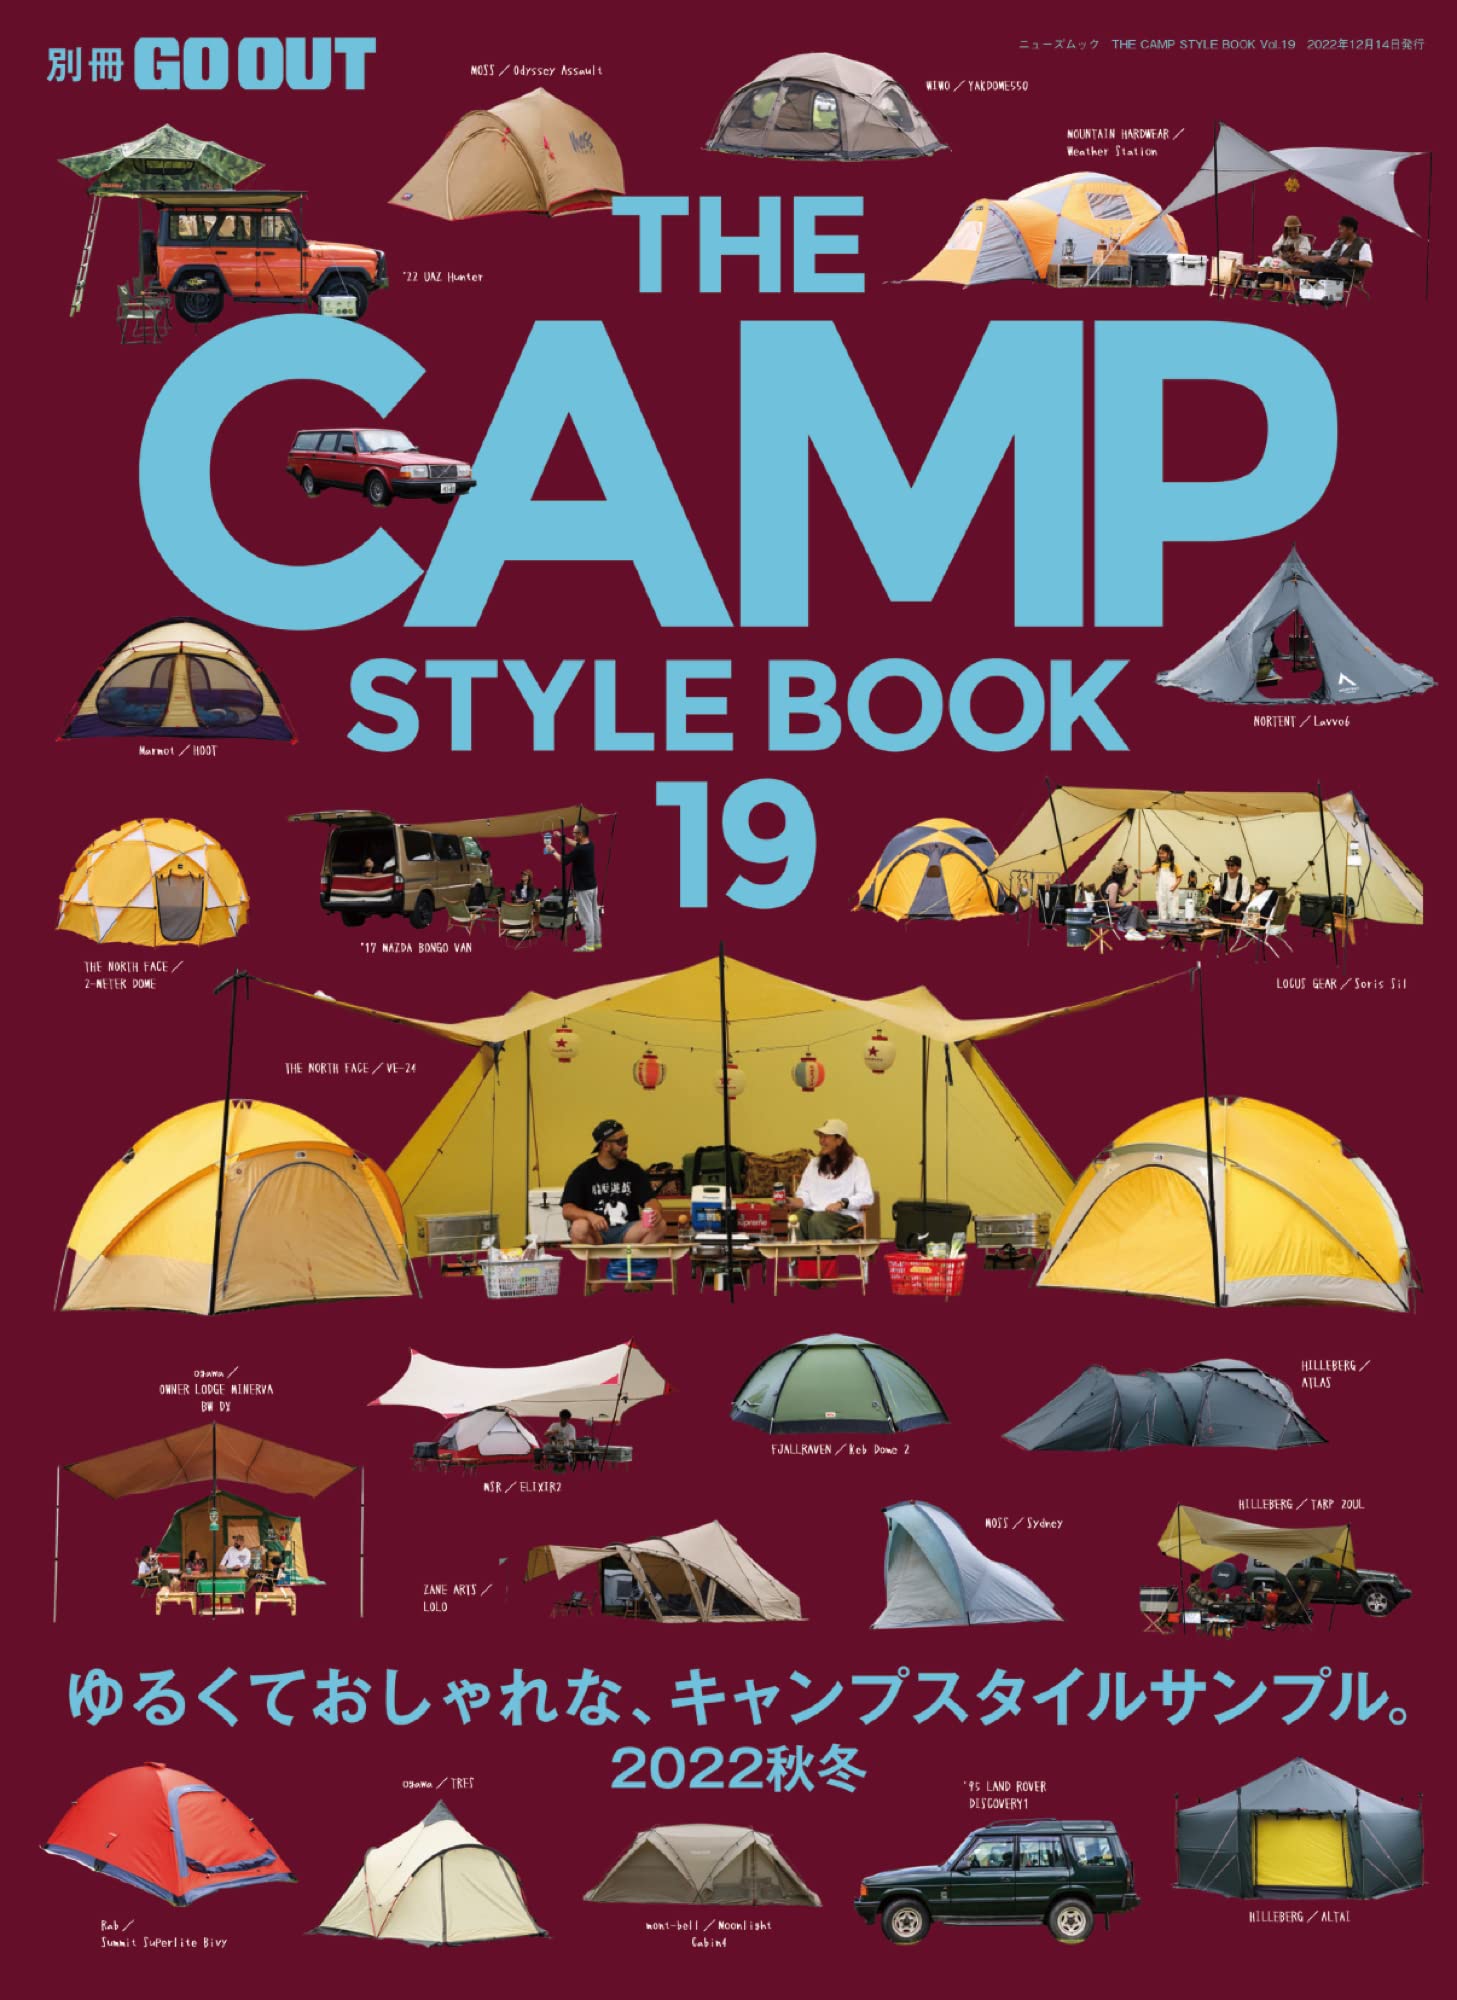 THE CAMP STYLE BOOK - キャンプ スタイル - Vol.19 別冊GO OUT (ニュ-ズムック)